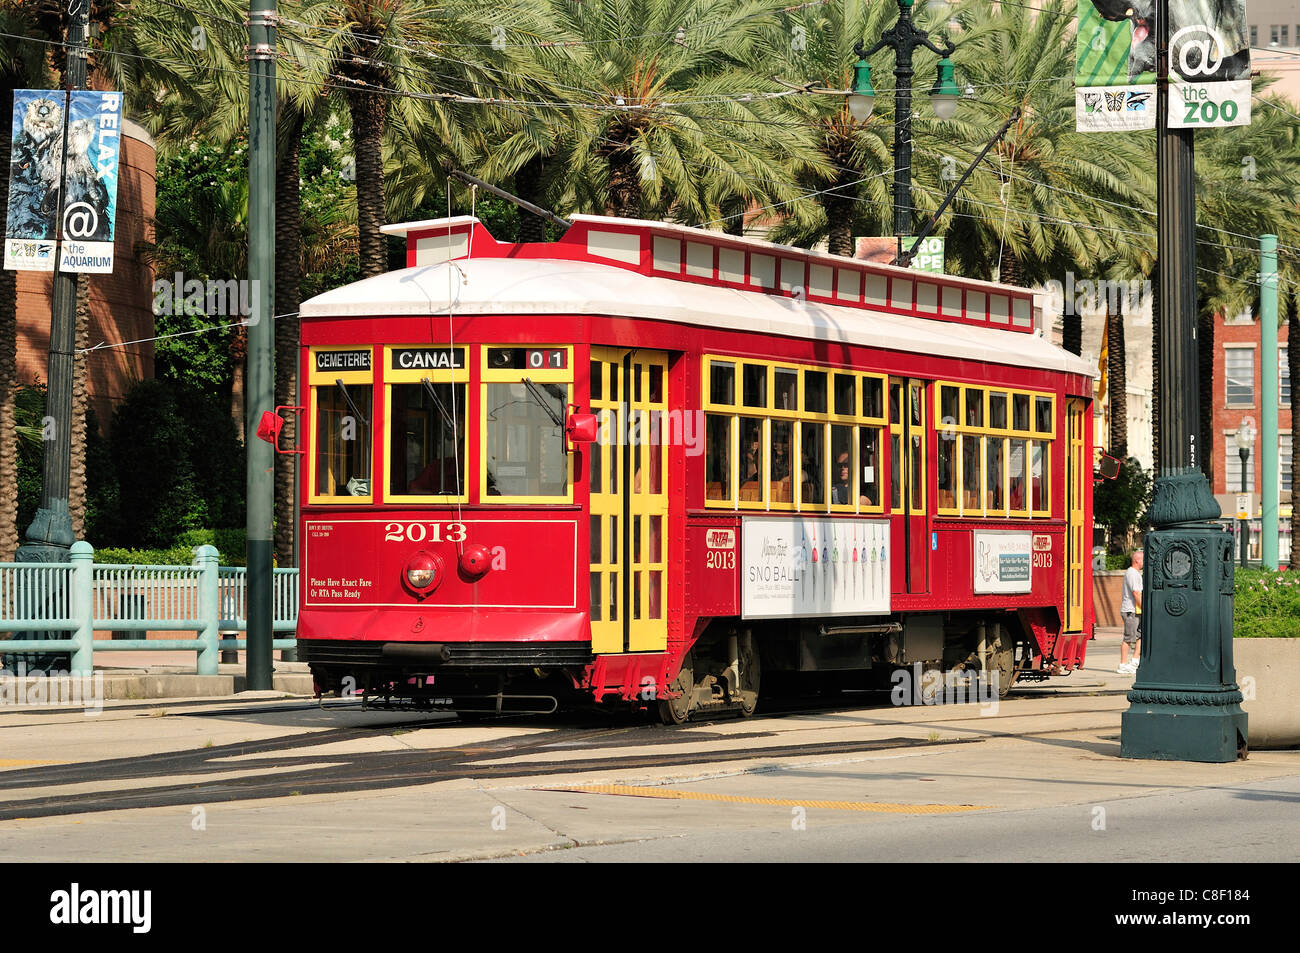 NOLA Trolley Uptown New Orleans Photography Charles Ave Digital Art Photography 940 Street Car St Travel Photo